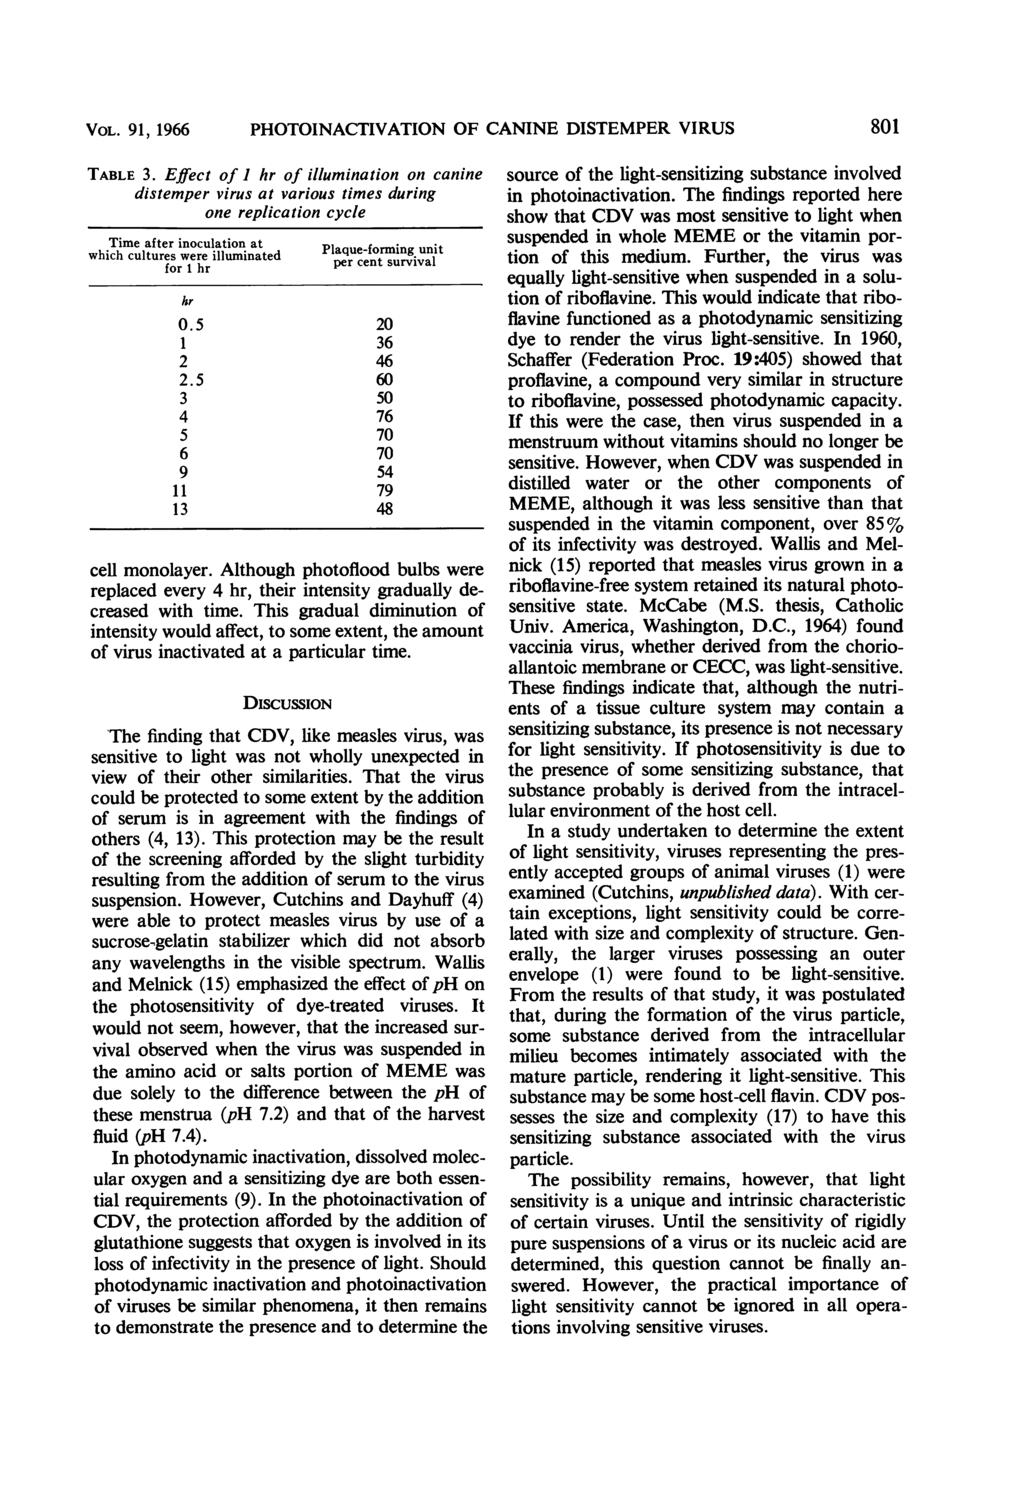 VOL. 91, 1966 PHOTOINACTIVATION OF CANINE DISTEMPER VIRUS TABLE 3.